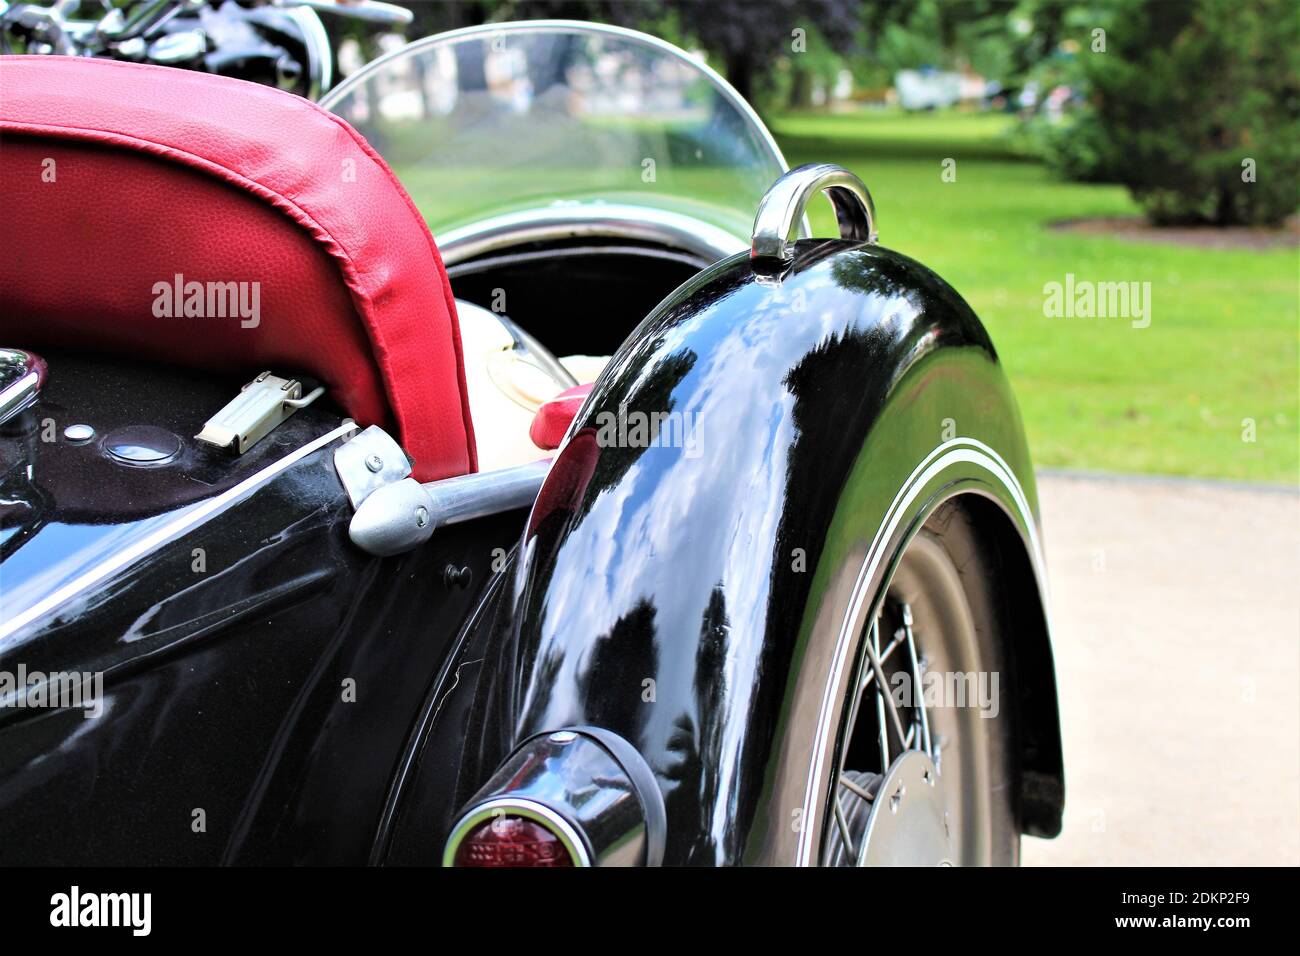 An image of a motorcycle sidecar Stock Photo